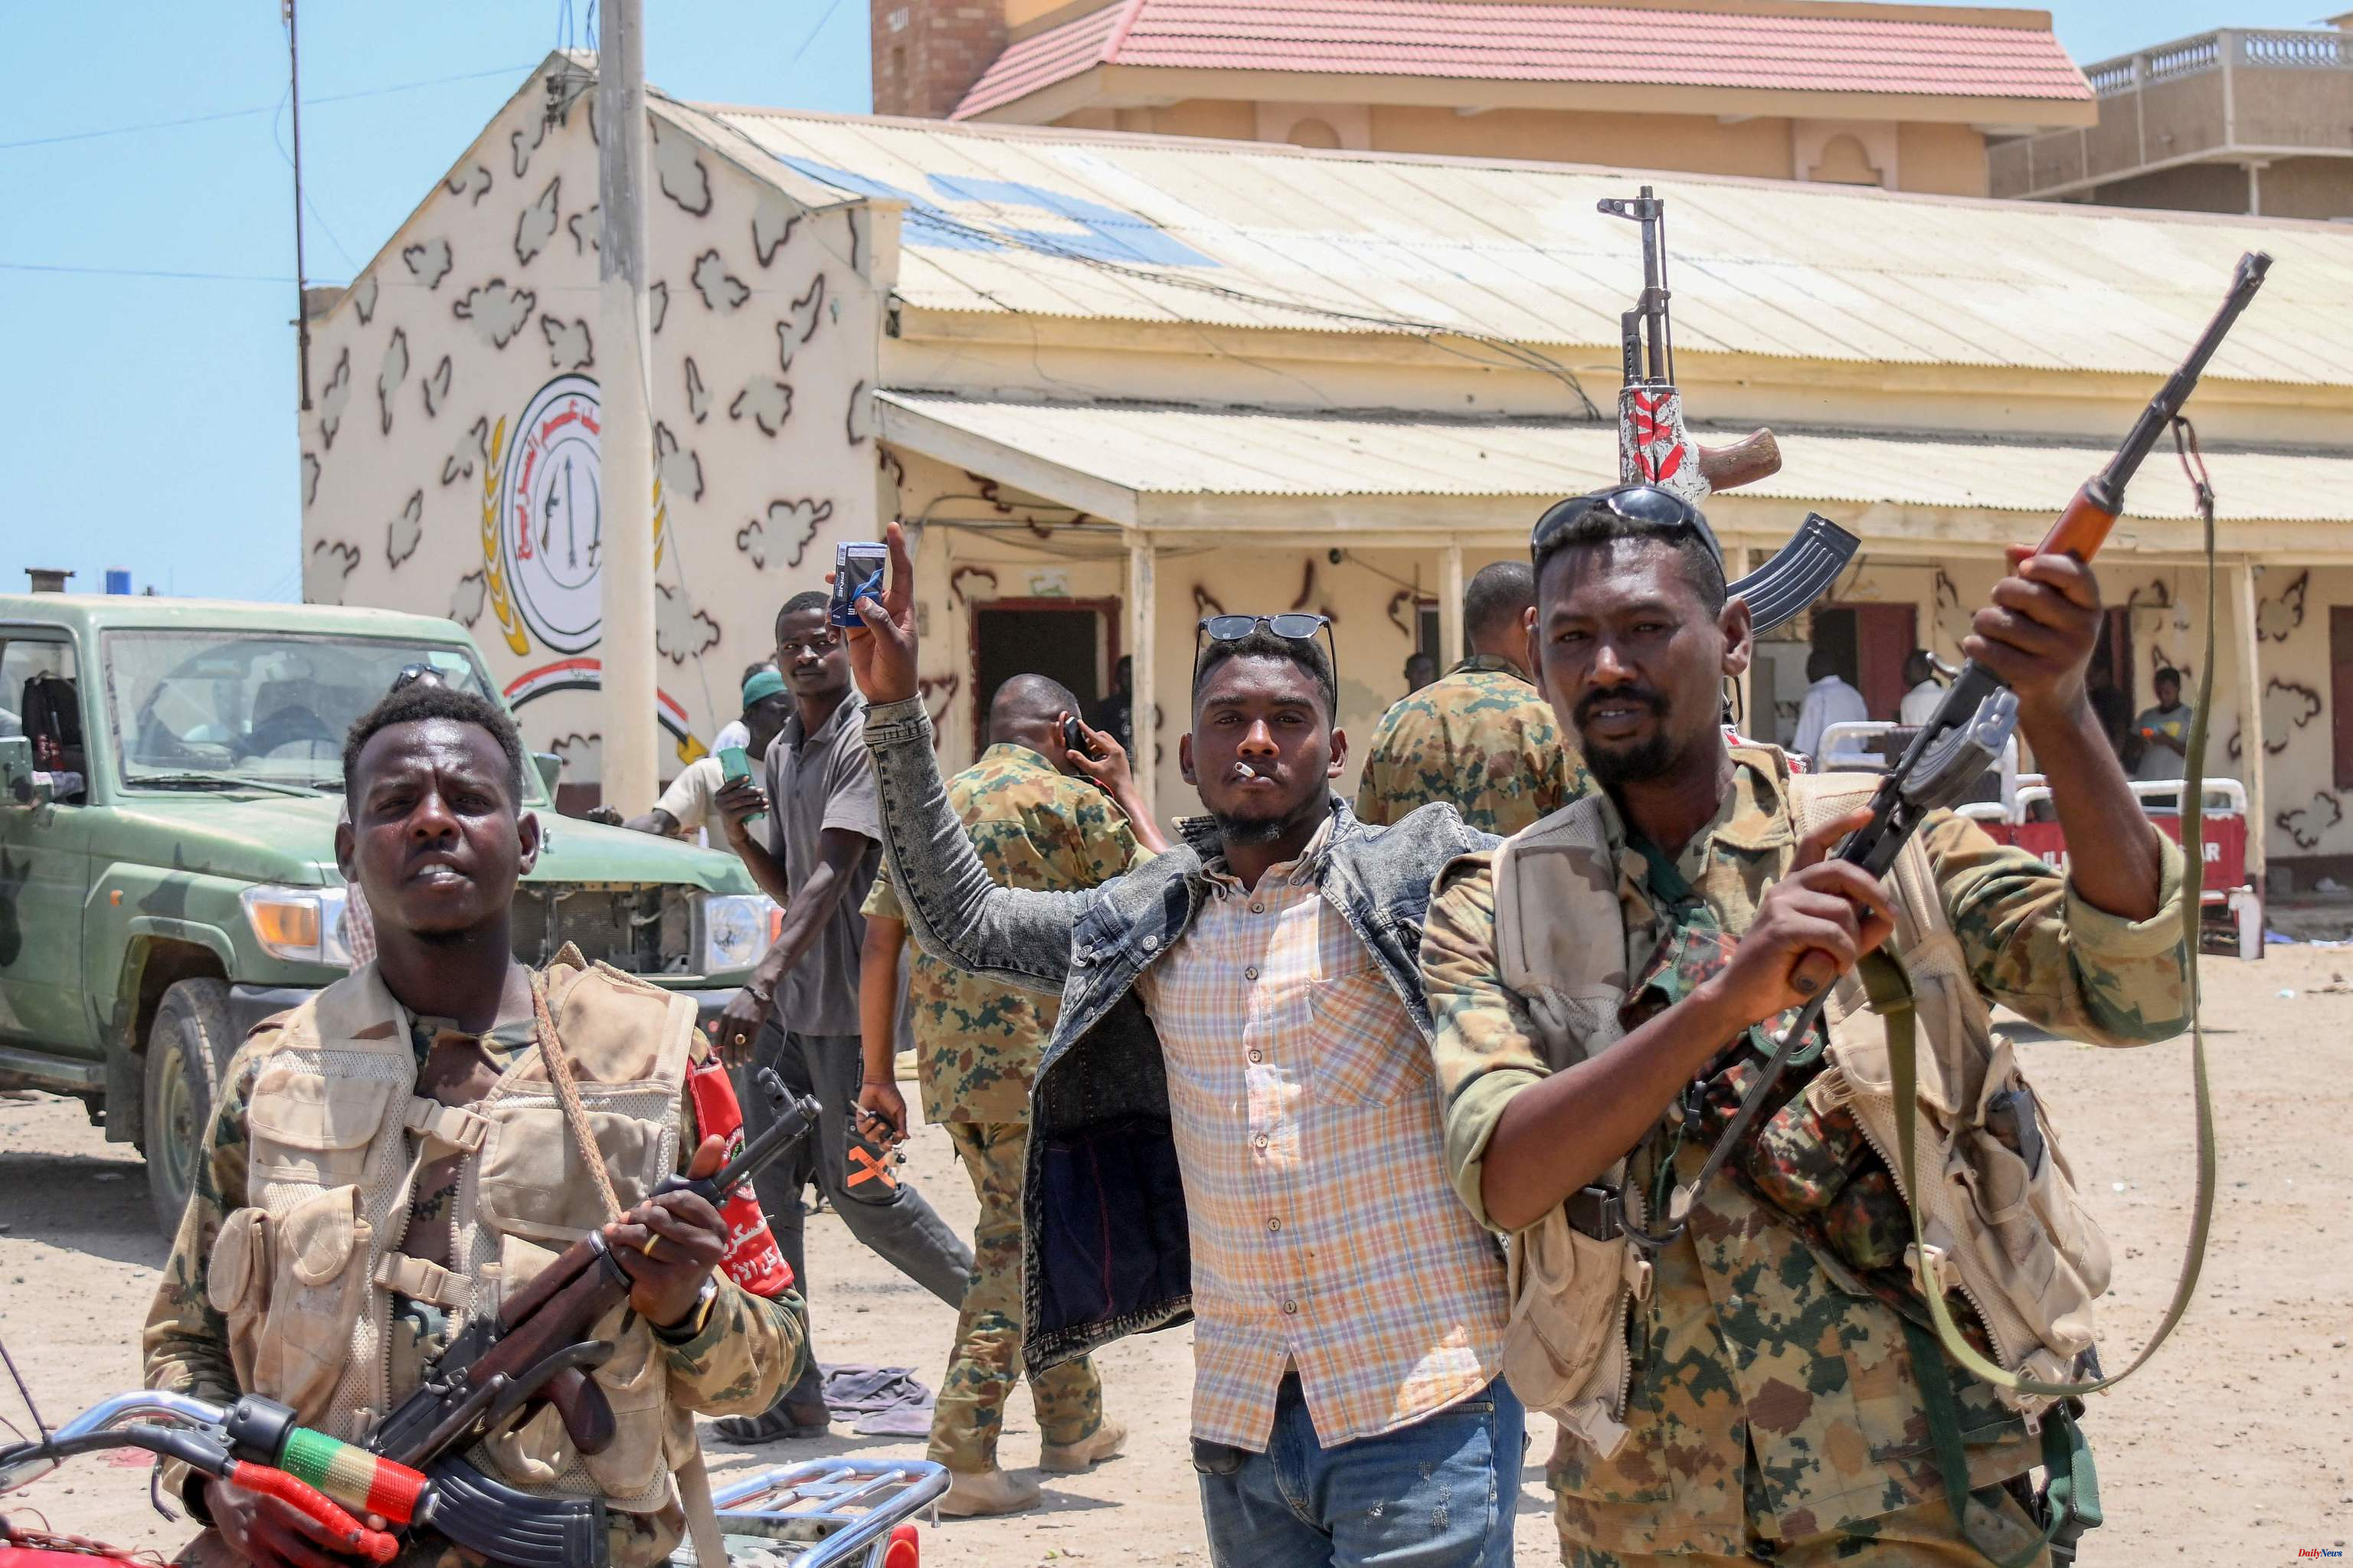 The fighting in Sudan already leaves almost 200 dead and 1,800 injured